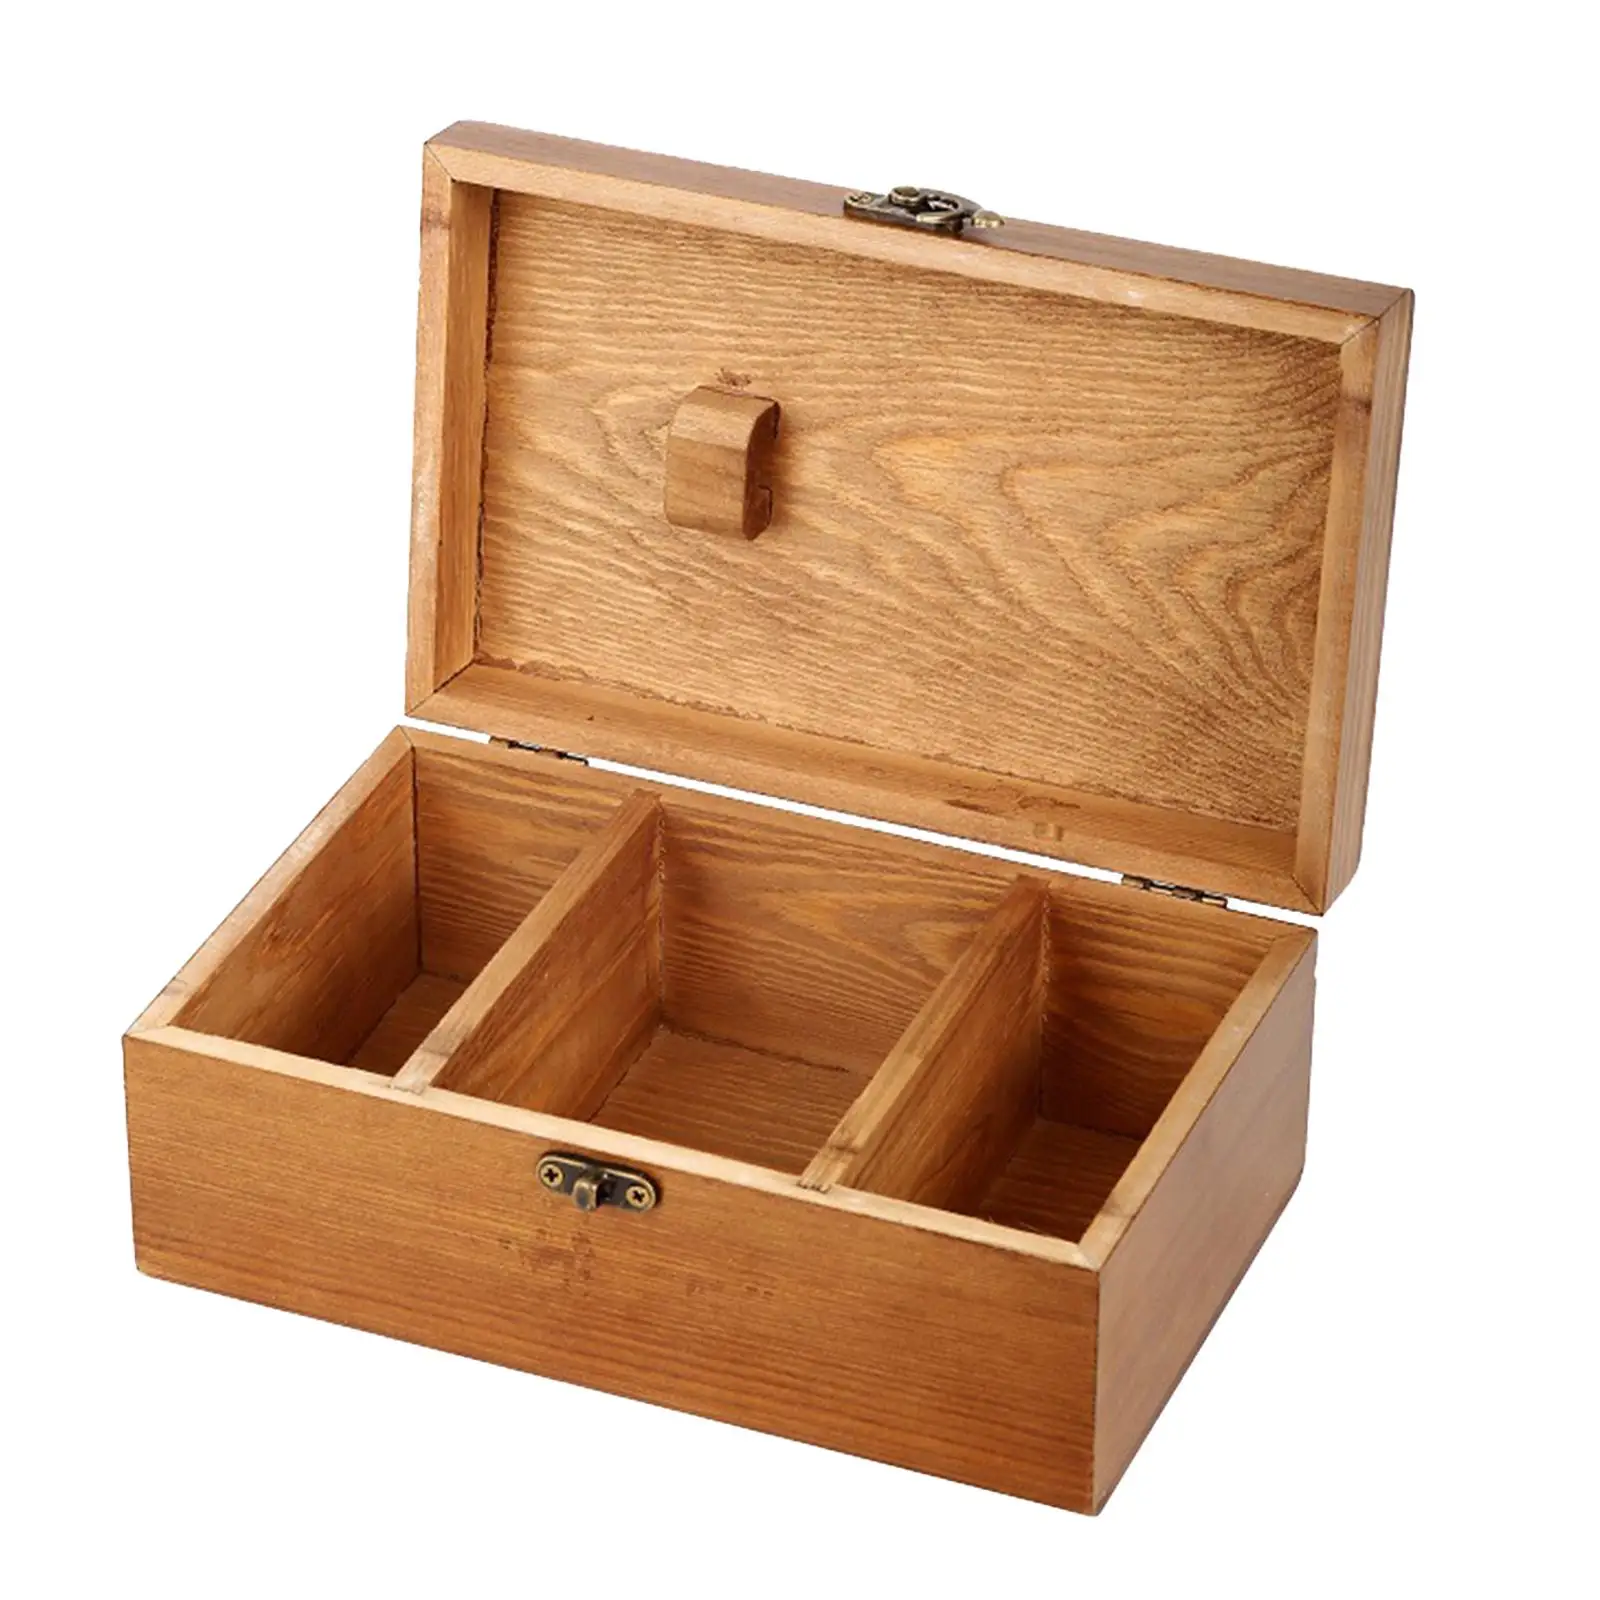 Wooden Sewing Box Empty Box Organizer for Jewelry Cosmetic Travel Pattern Accessories Compact DIY Sewing Box Basket